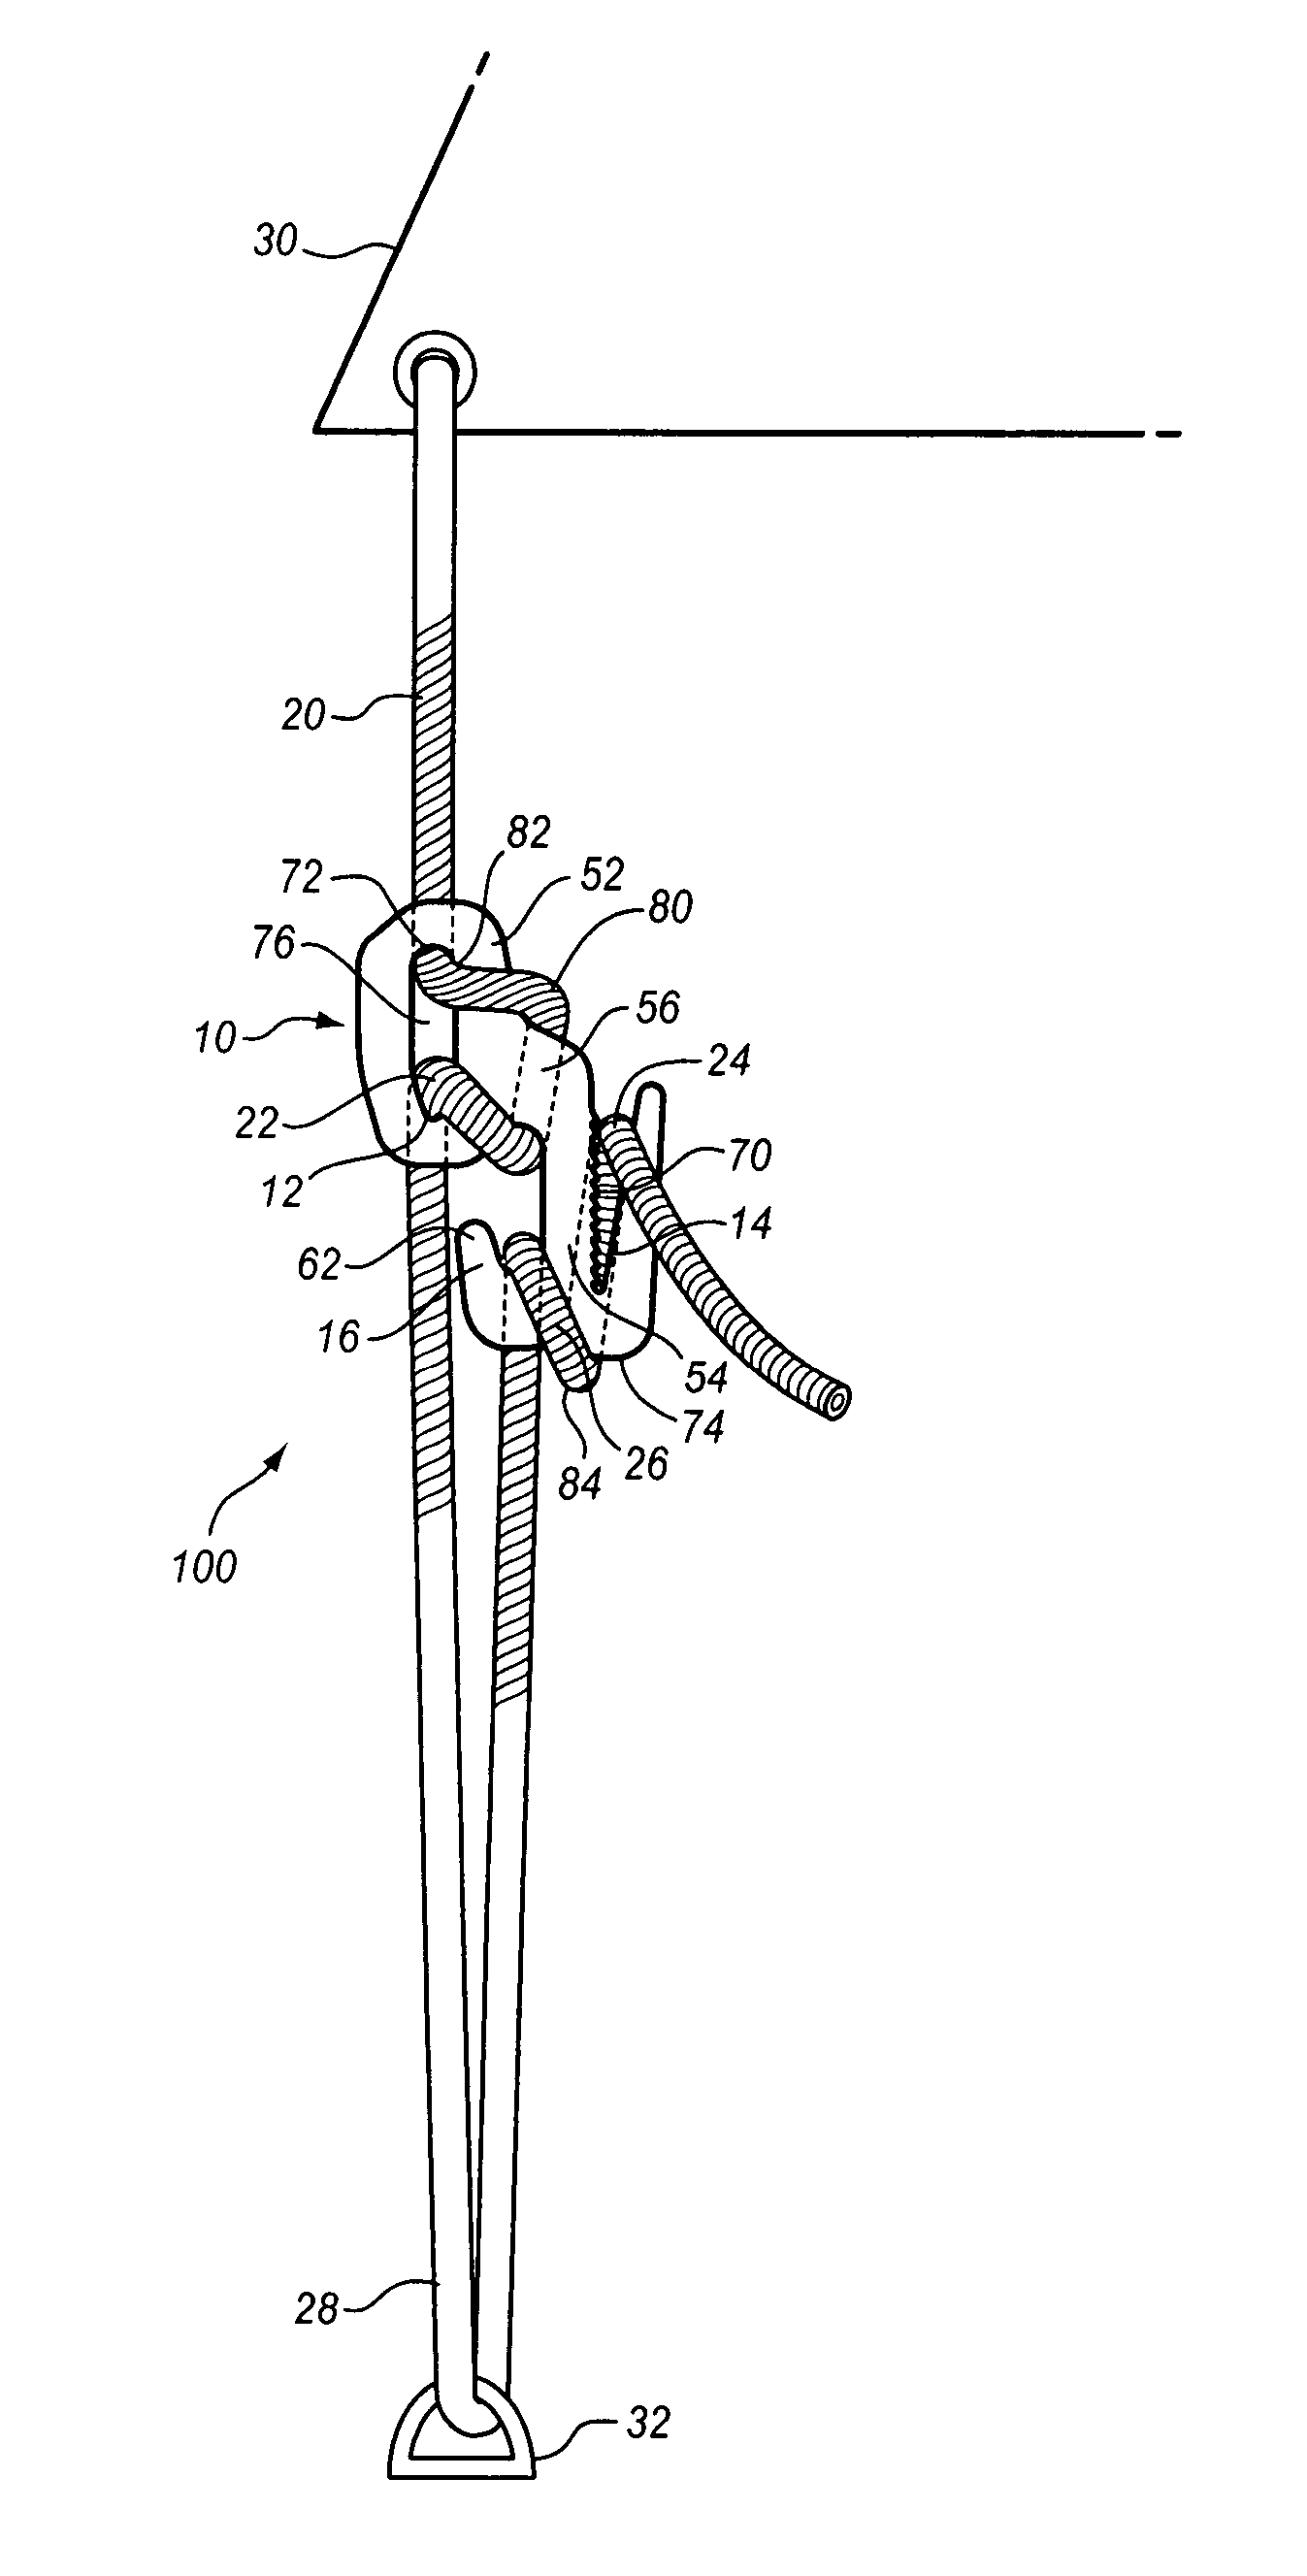 Tie-down and tensioning system